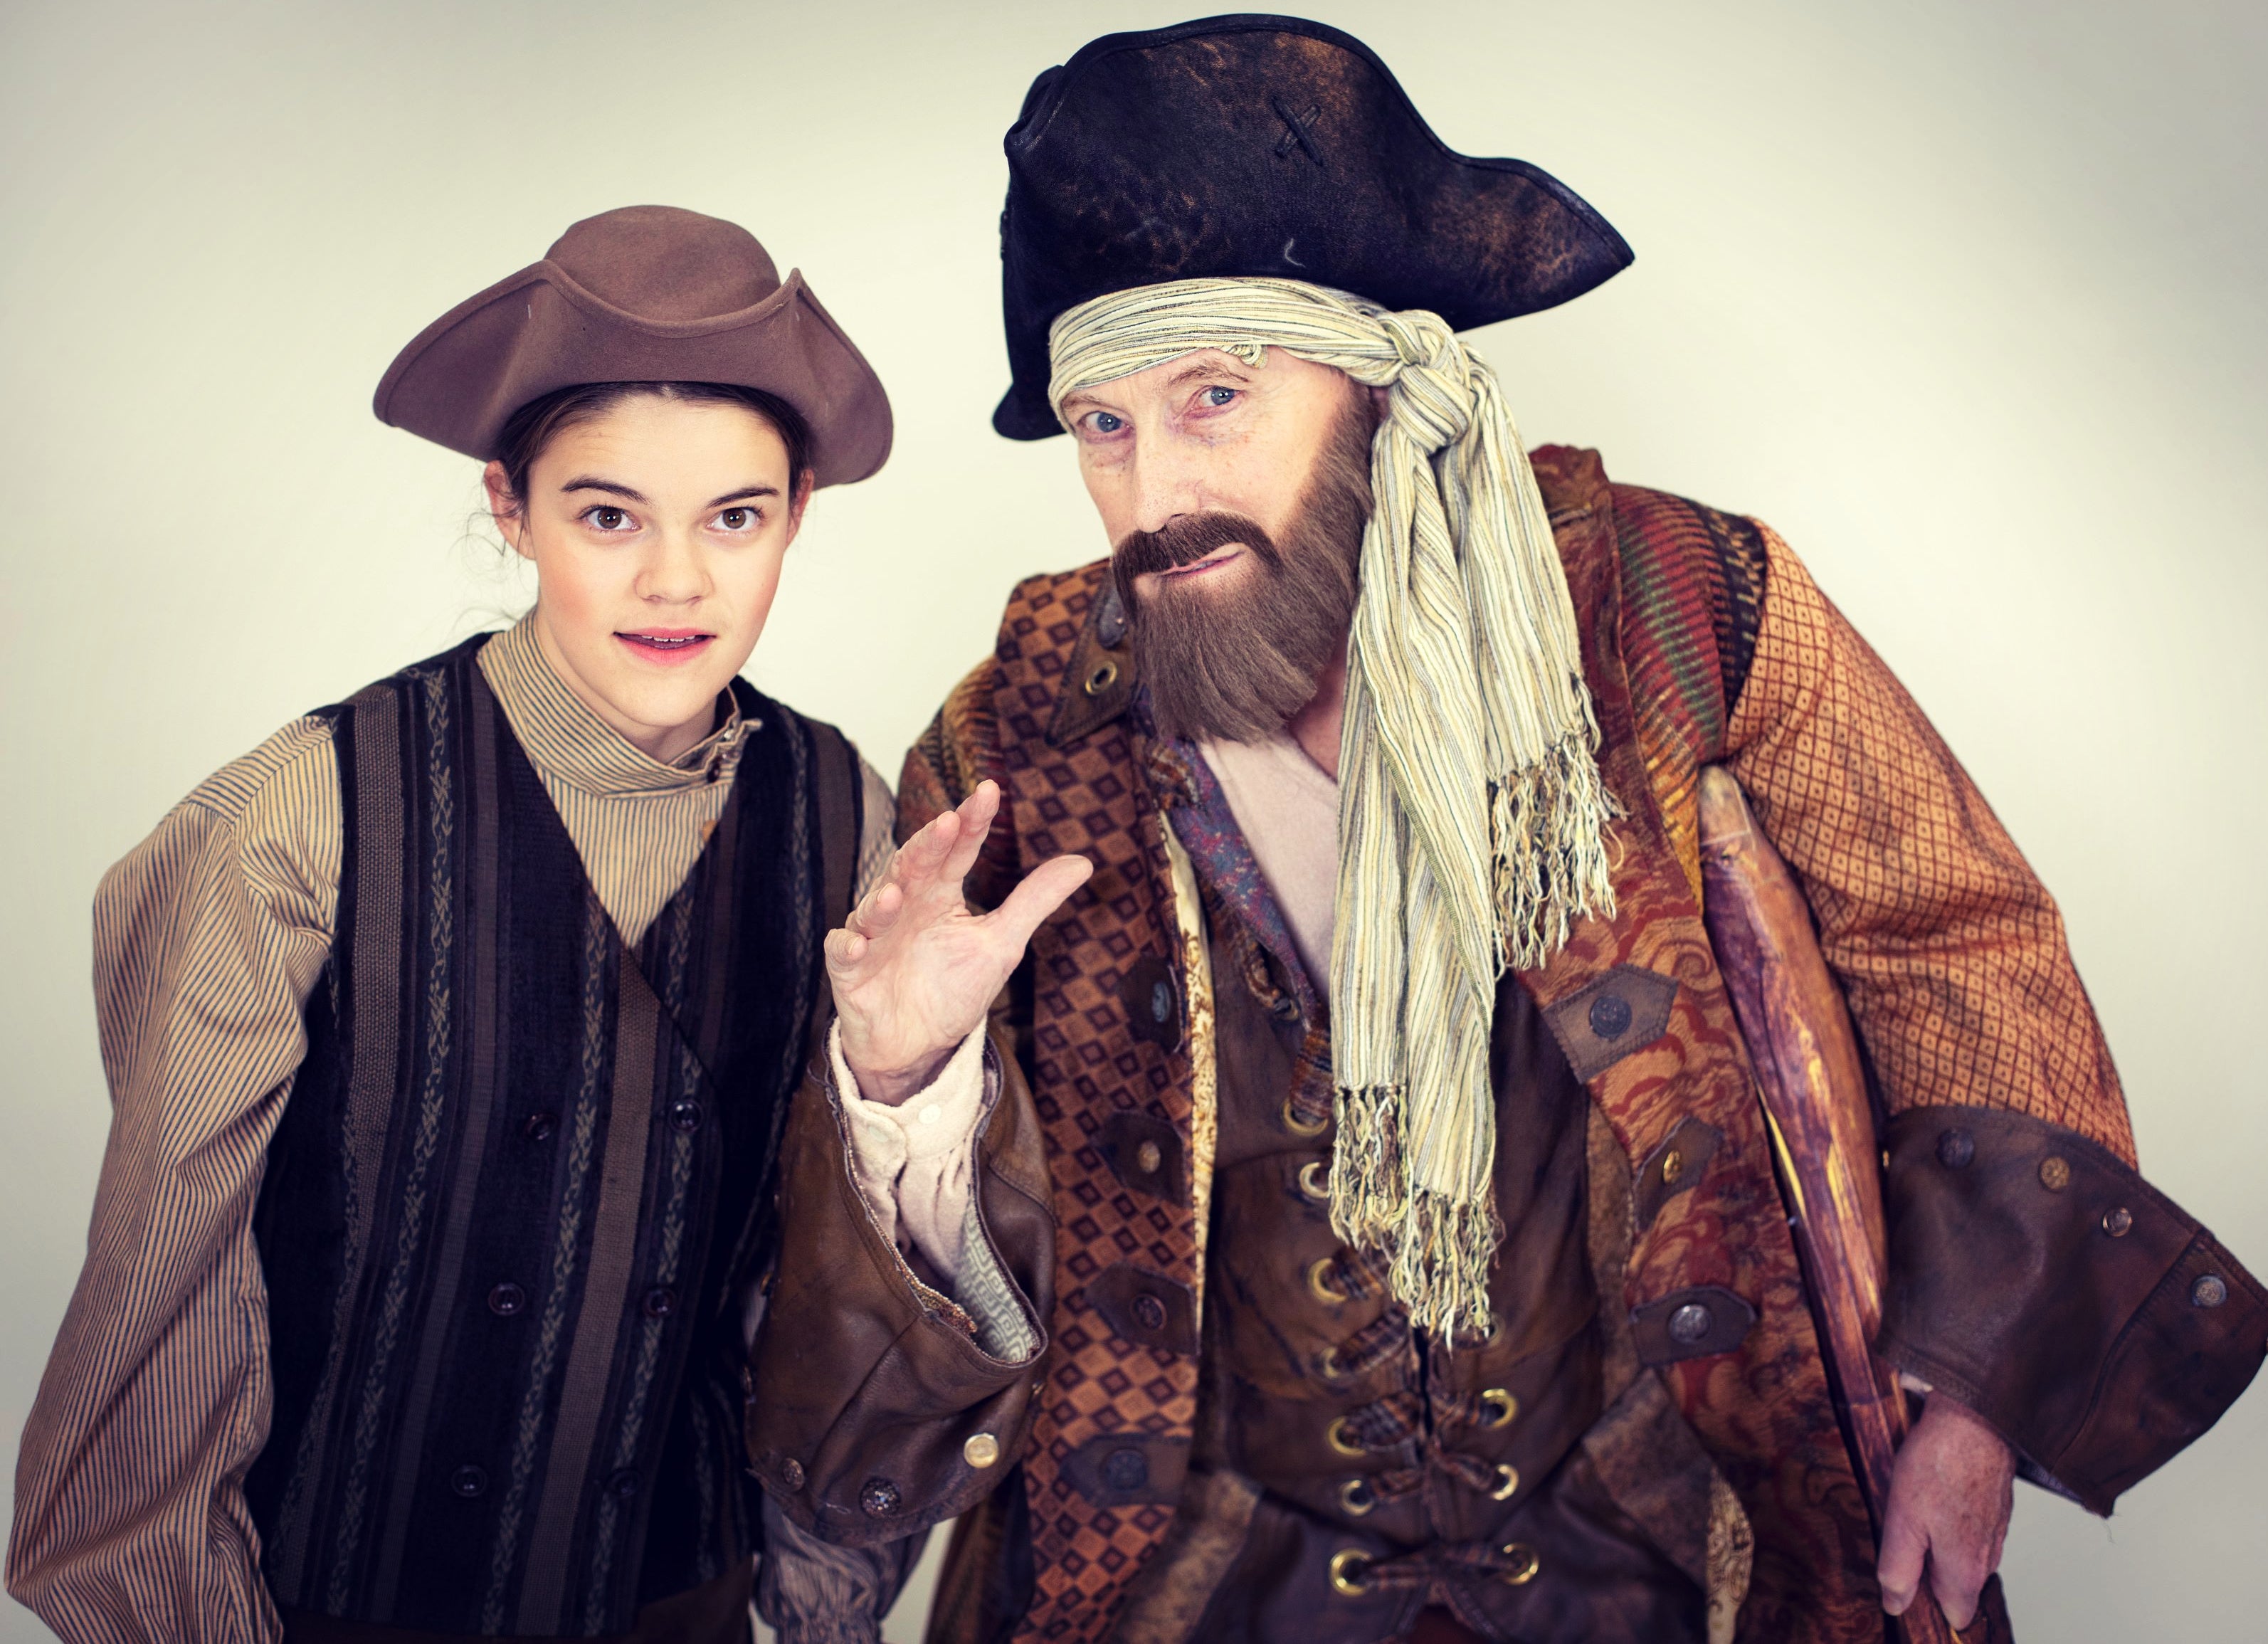 Two historically dressed characters from play in Woodland production